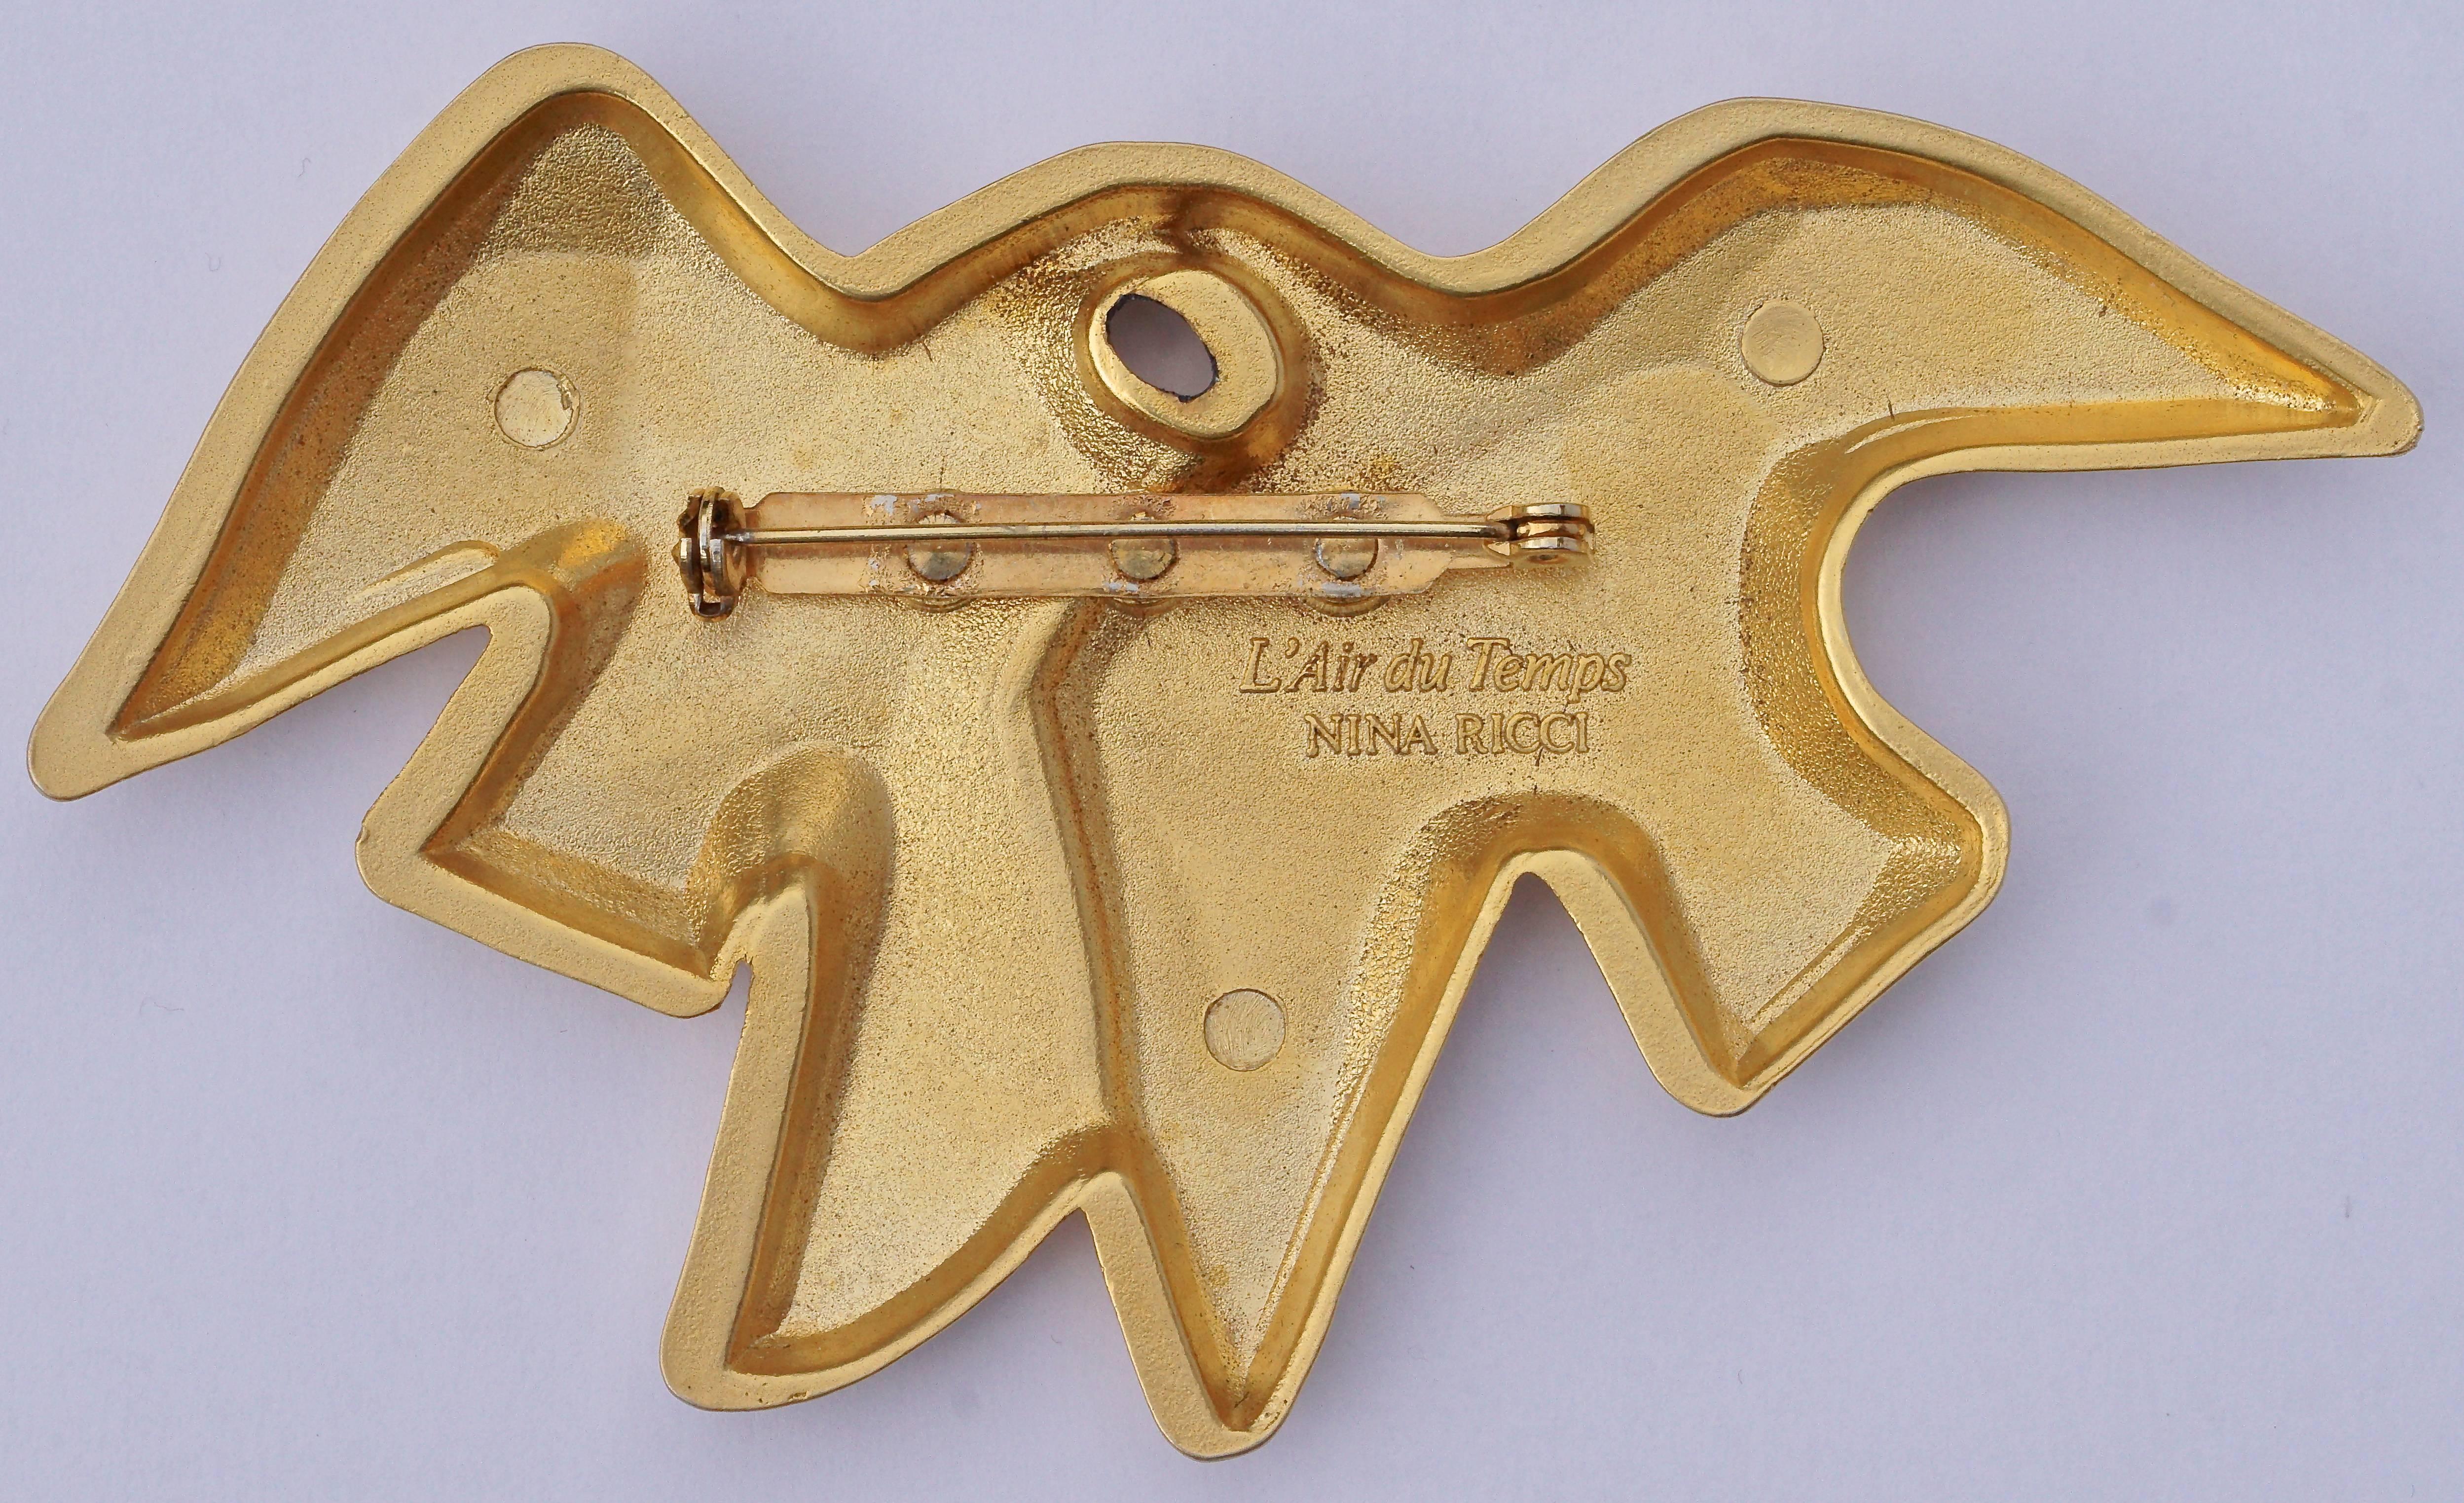 Nina Ricci vintage gold plated L'Air du Temps brooch designed with two doves, symbolic of the L'Air du Temps perfume. The birds have a lovely golden satin finish. Measuring width 10.3cm, 4 inches, by maximum length 5.8cm, 2.3 inches. This French